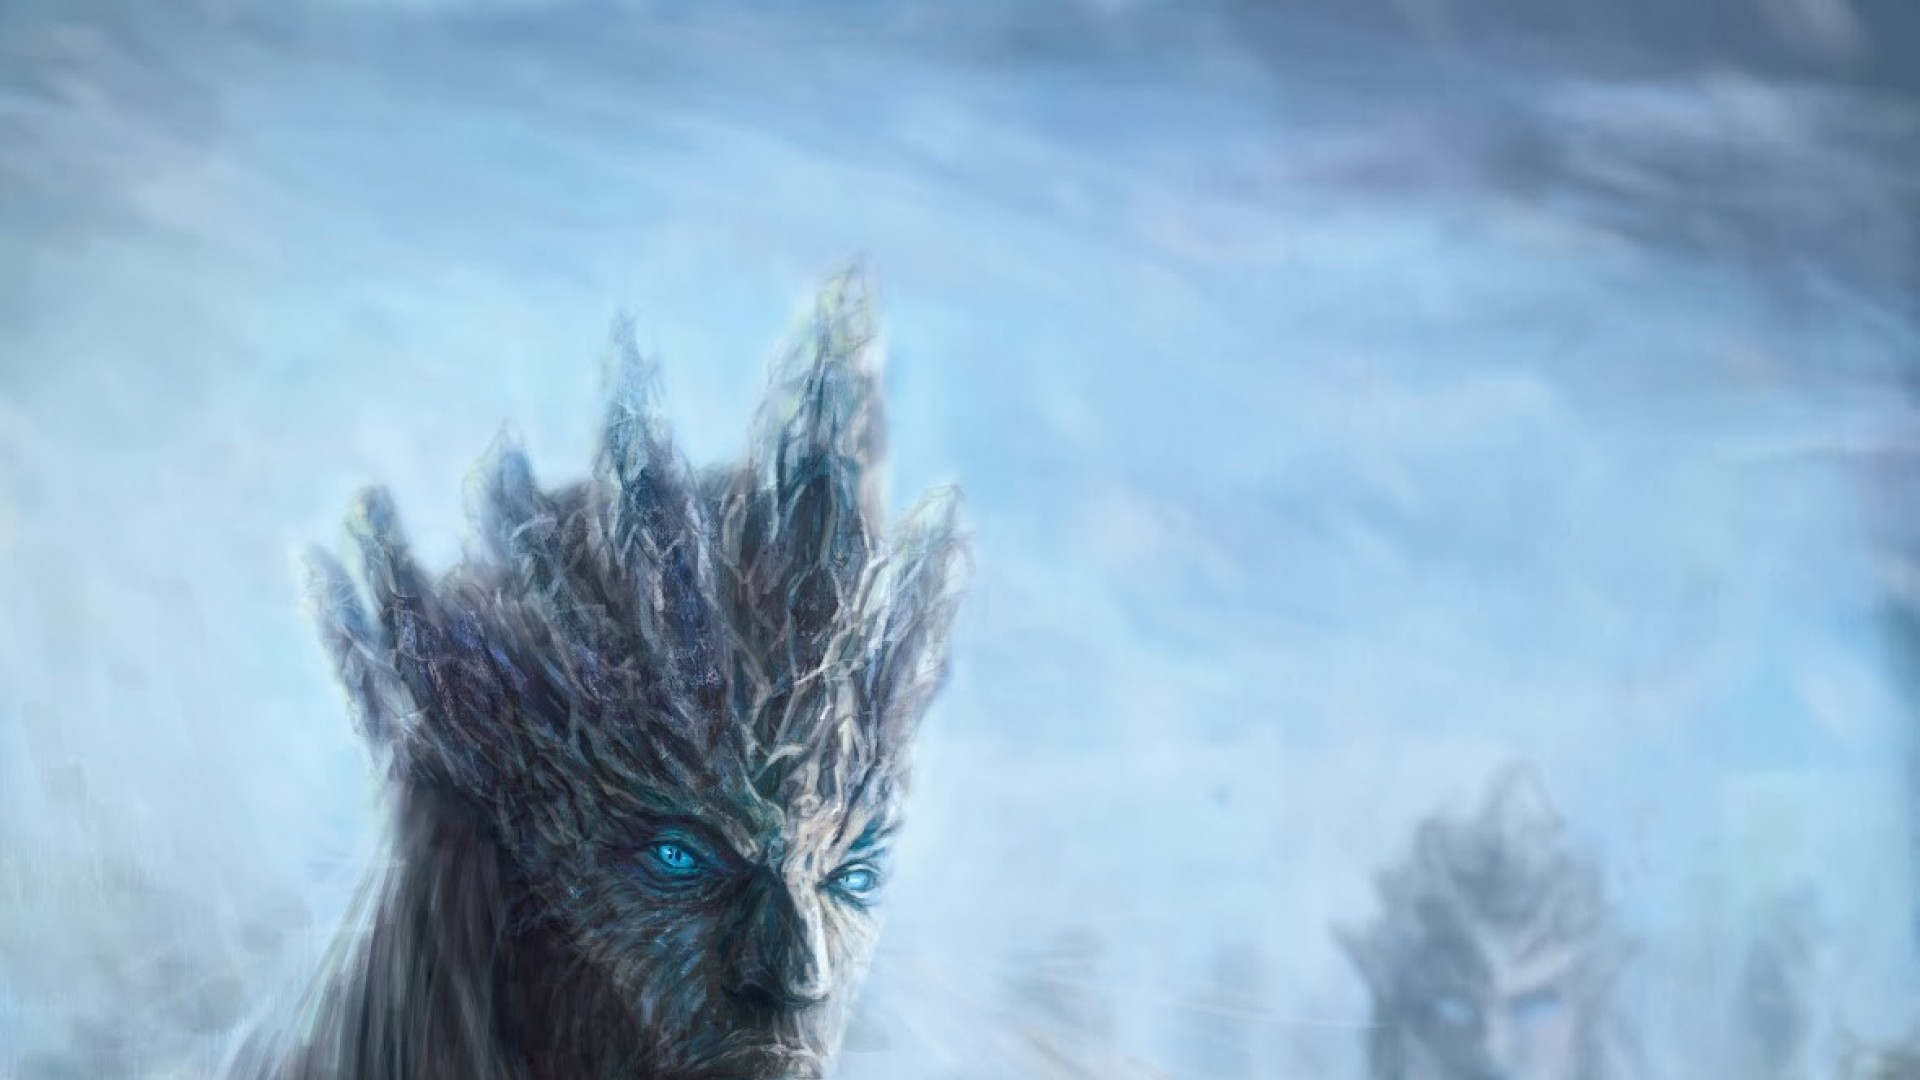 Game of Thrones 1080p   Wallpaper High Definition High Quality